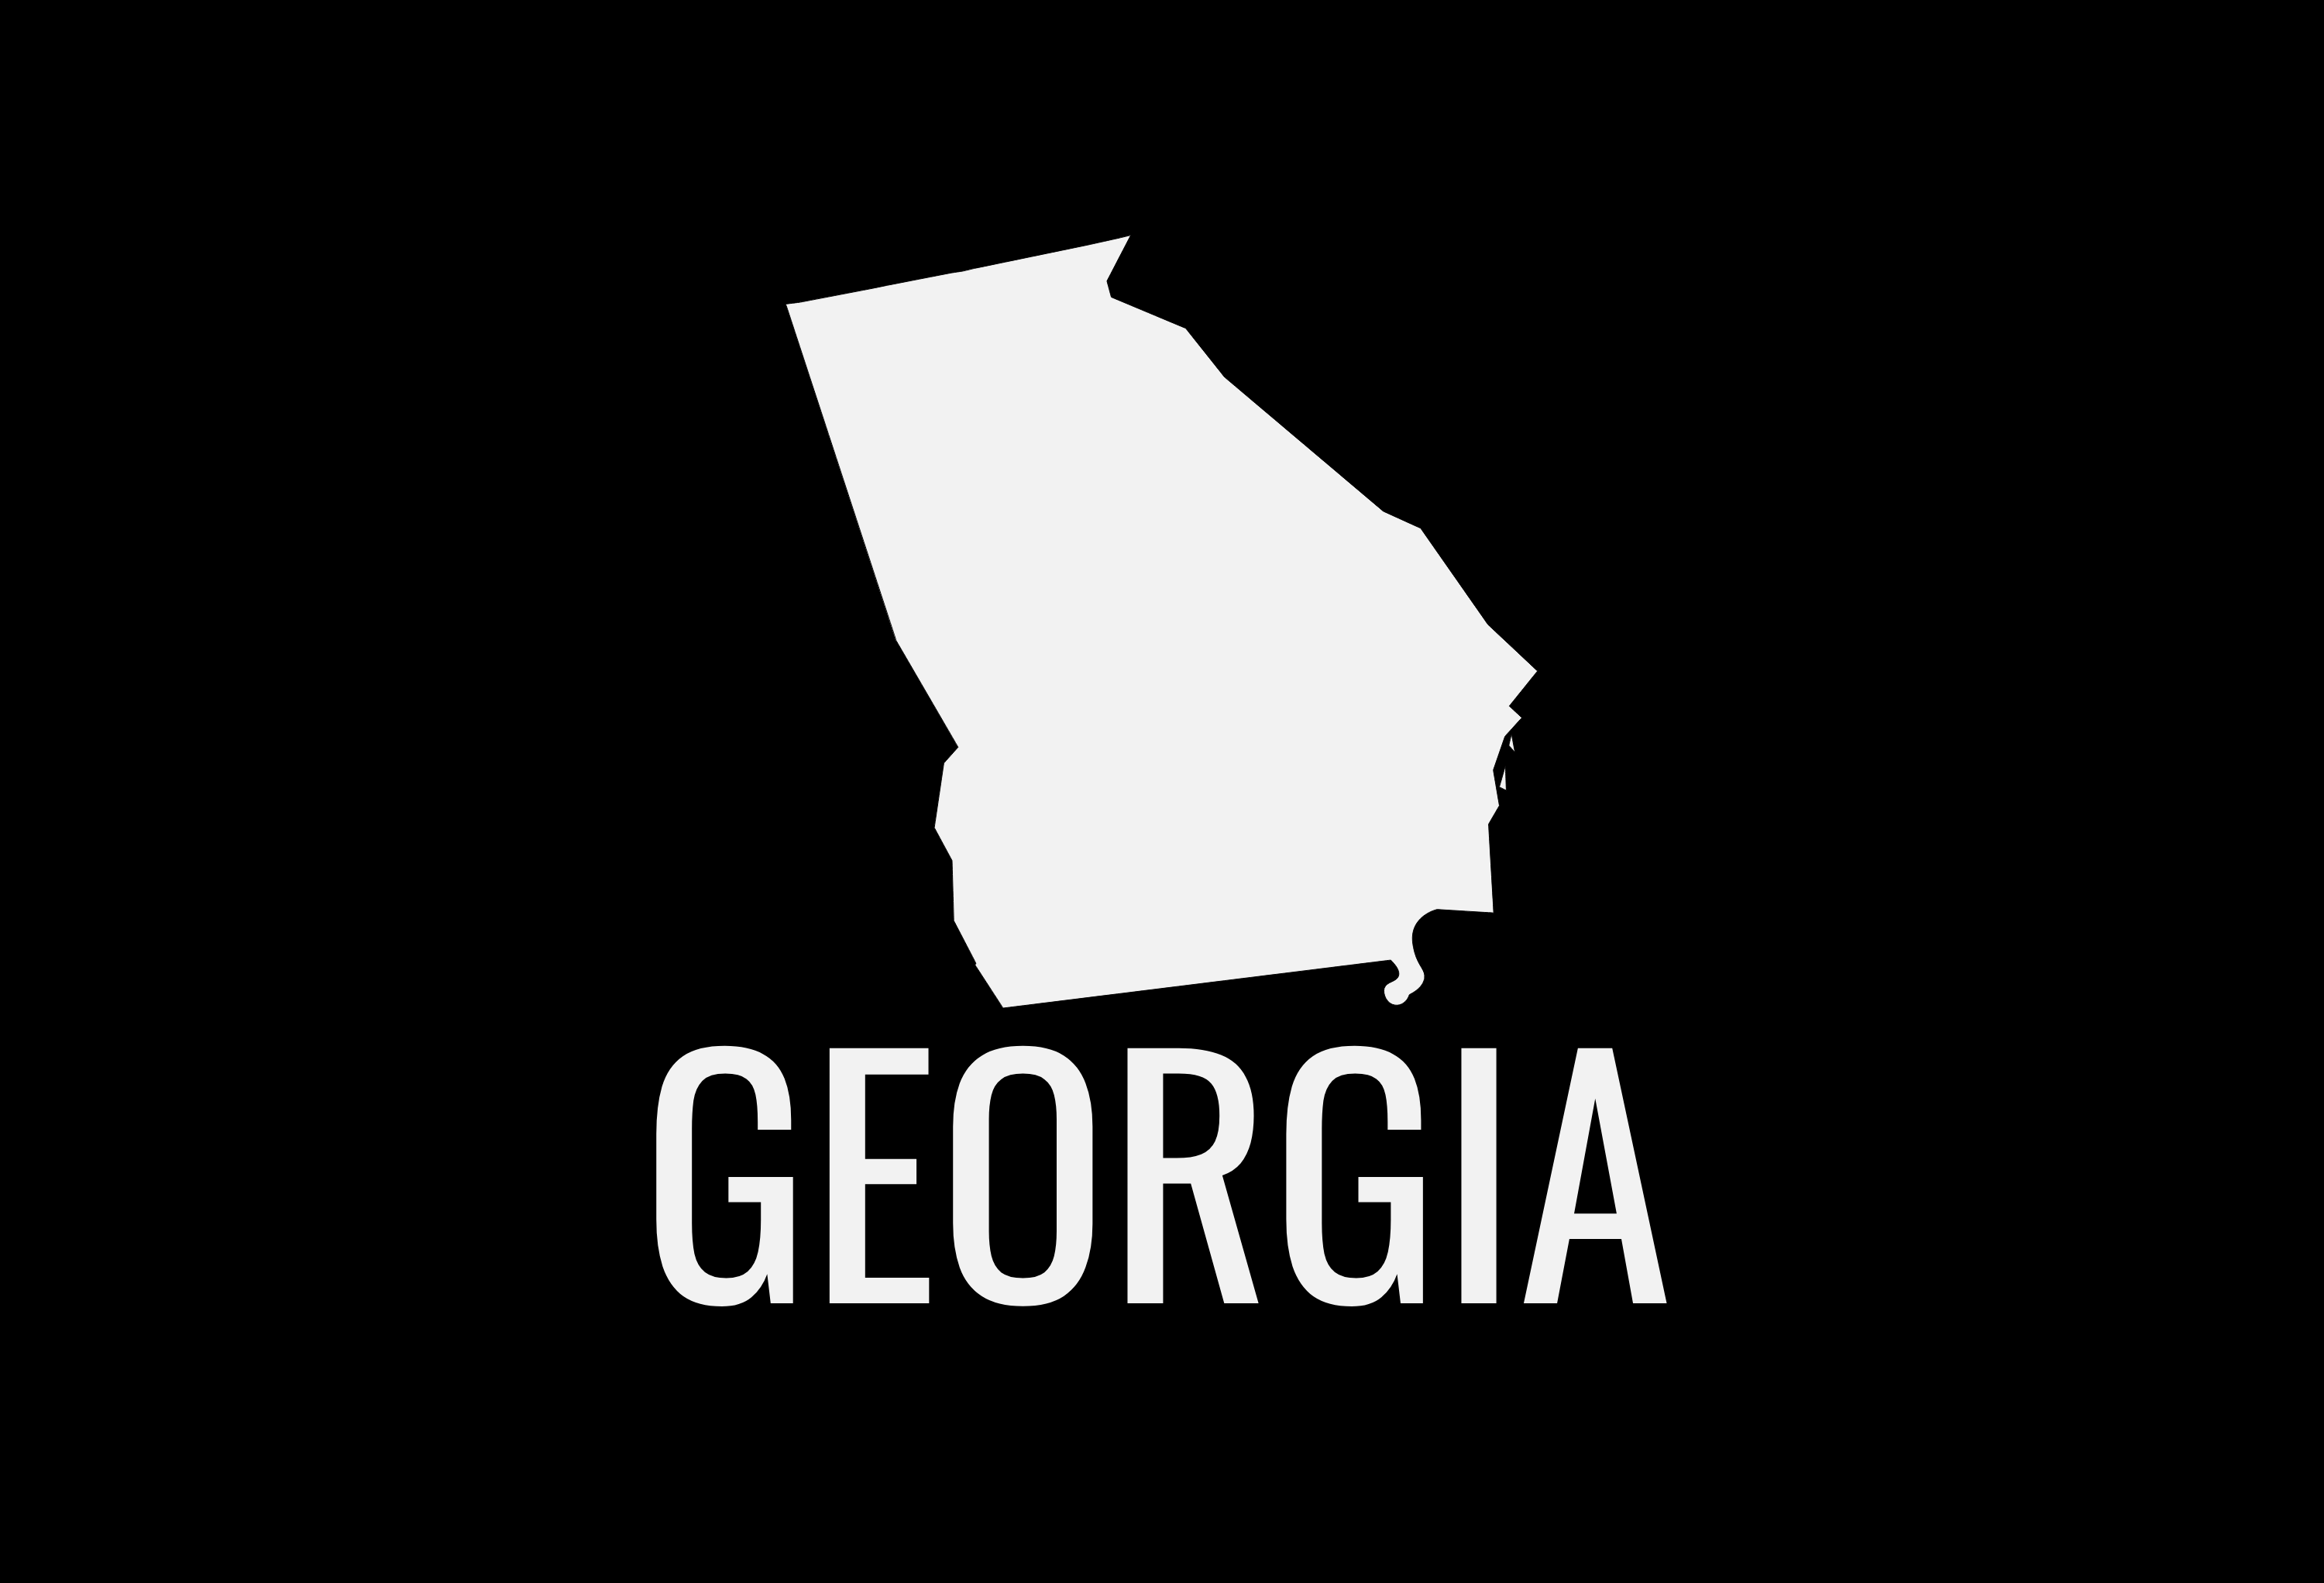 Georgia State Map Car Decal - Permanent Vinyl Sticker for Cars, Vehicle, Doors, Windows, Laptop, and more!